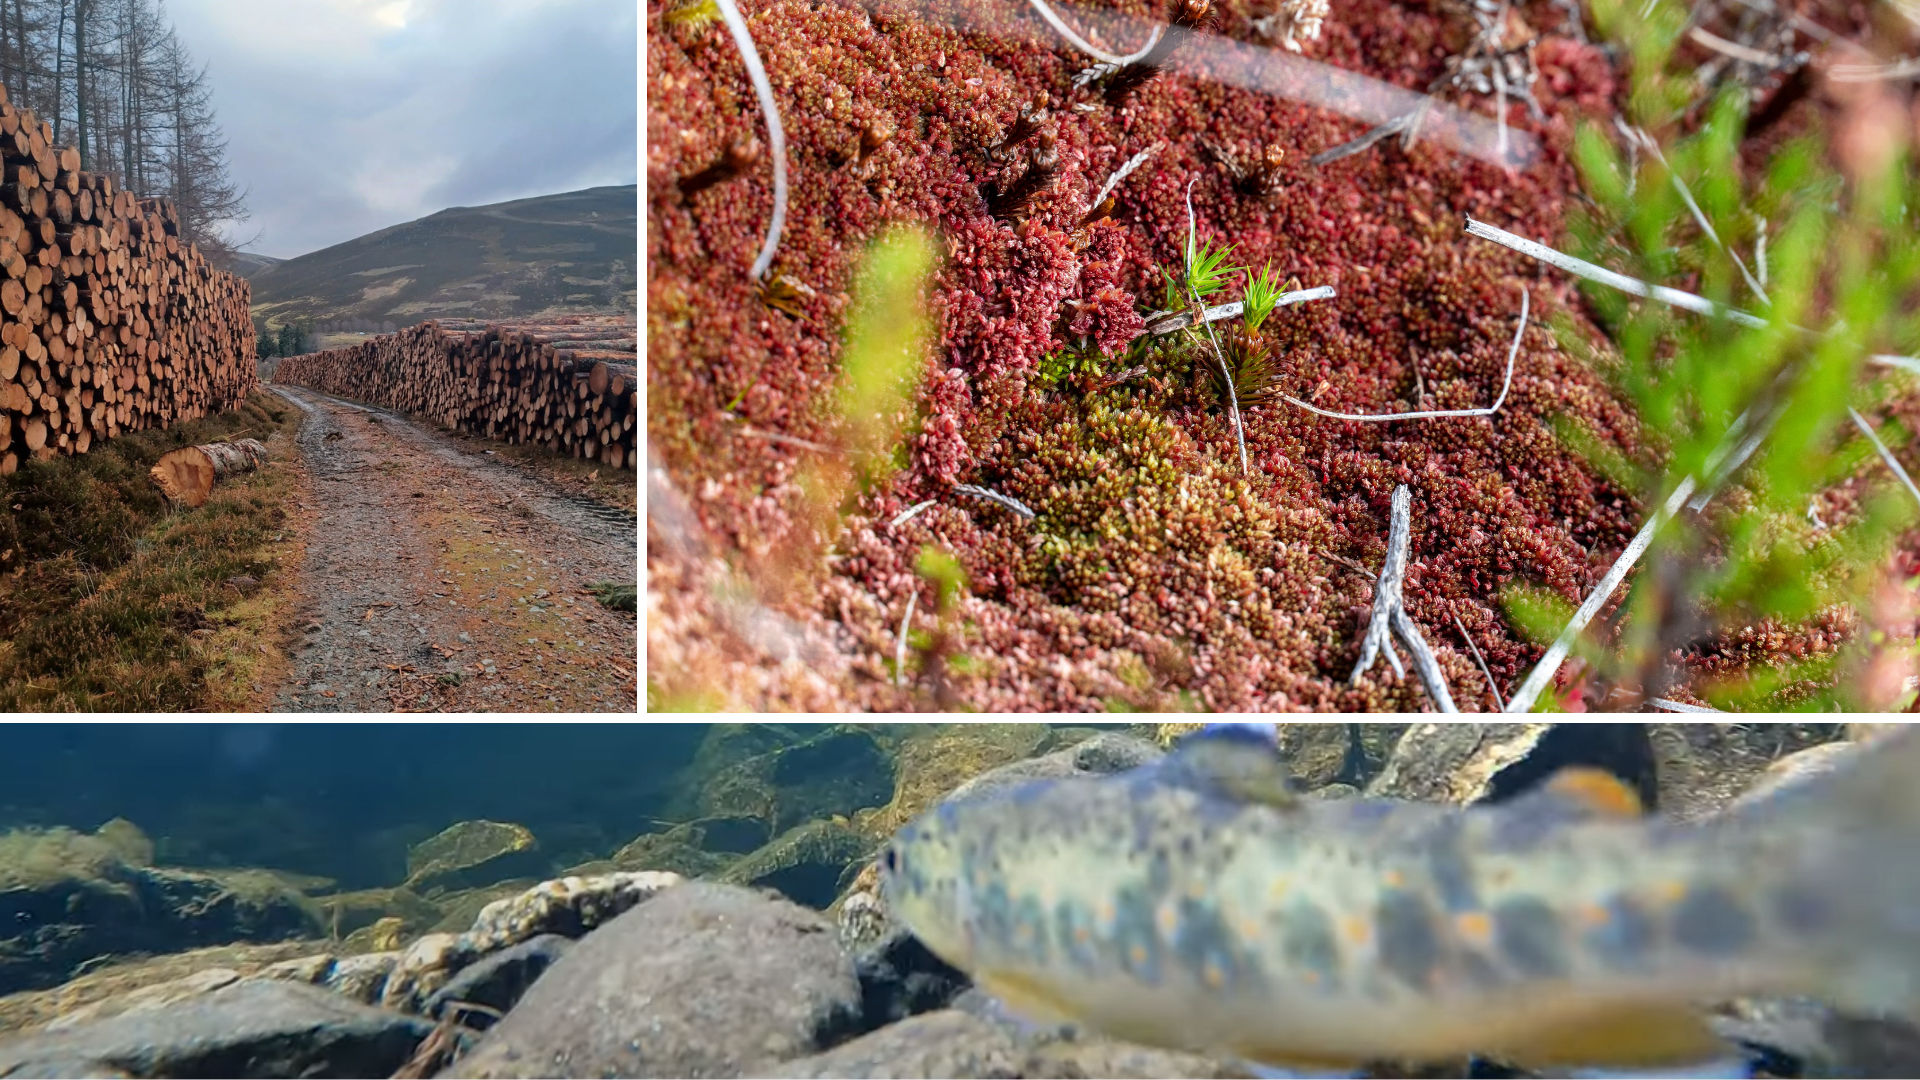 A collage of three images. Top left: logs stacked by a road. Top right: a close up of red toned plants. Bottom: an underwater shot of a fish.